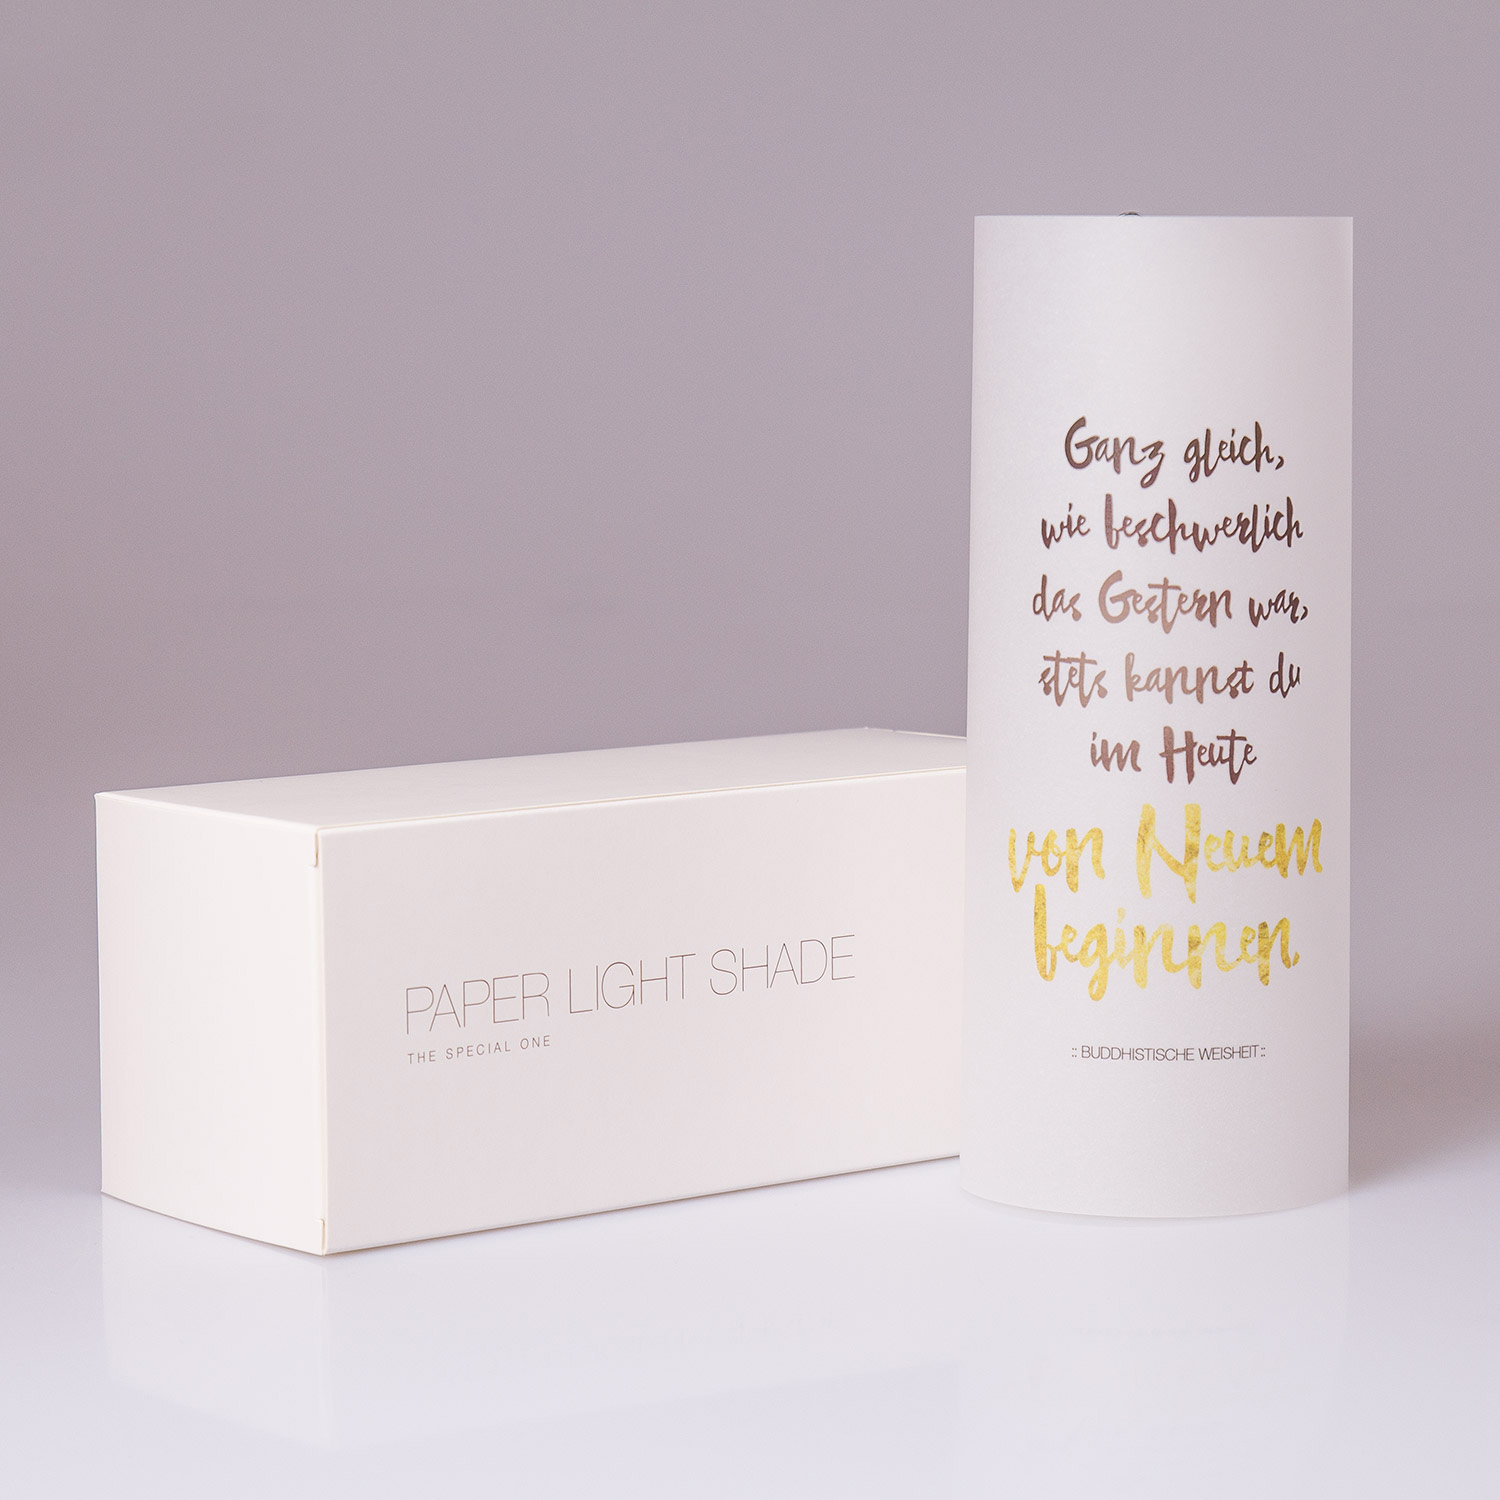 Paper Light Shade Motiv "Spruch" - The Special One